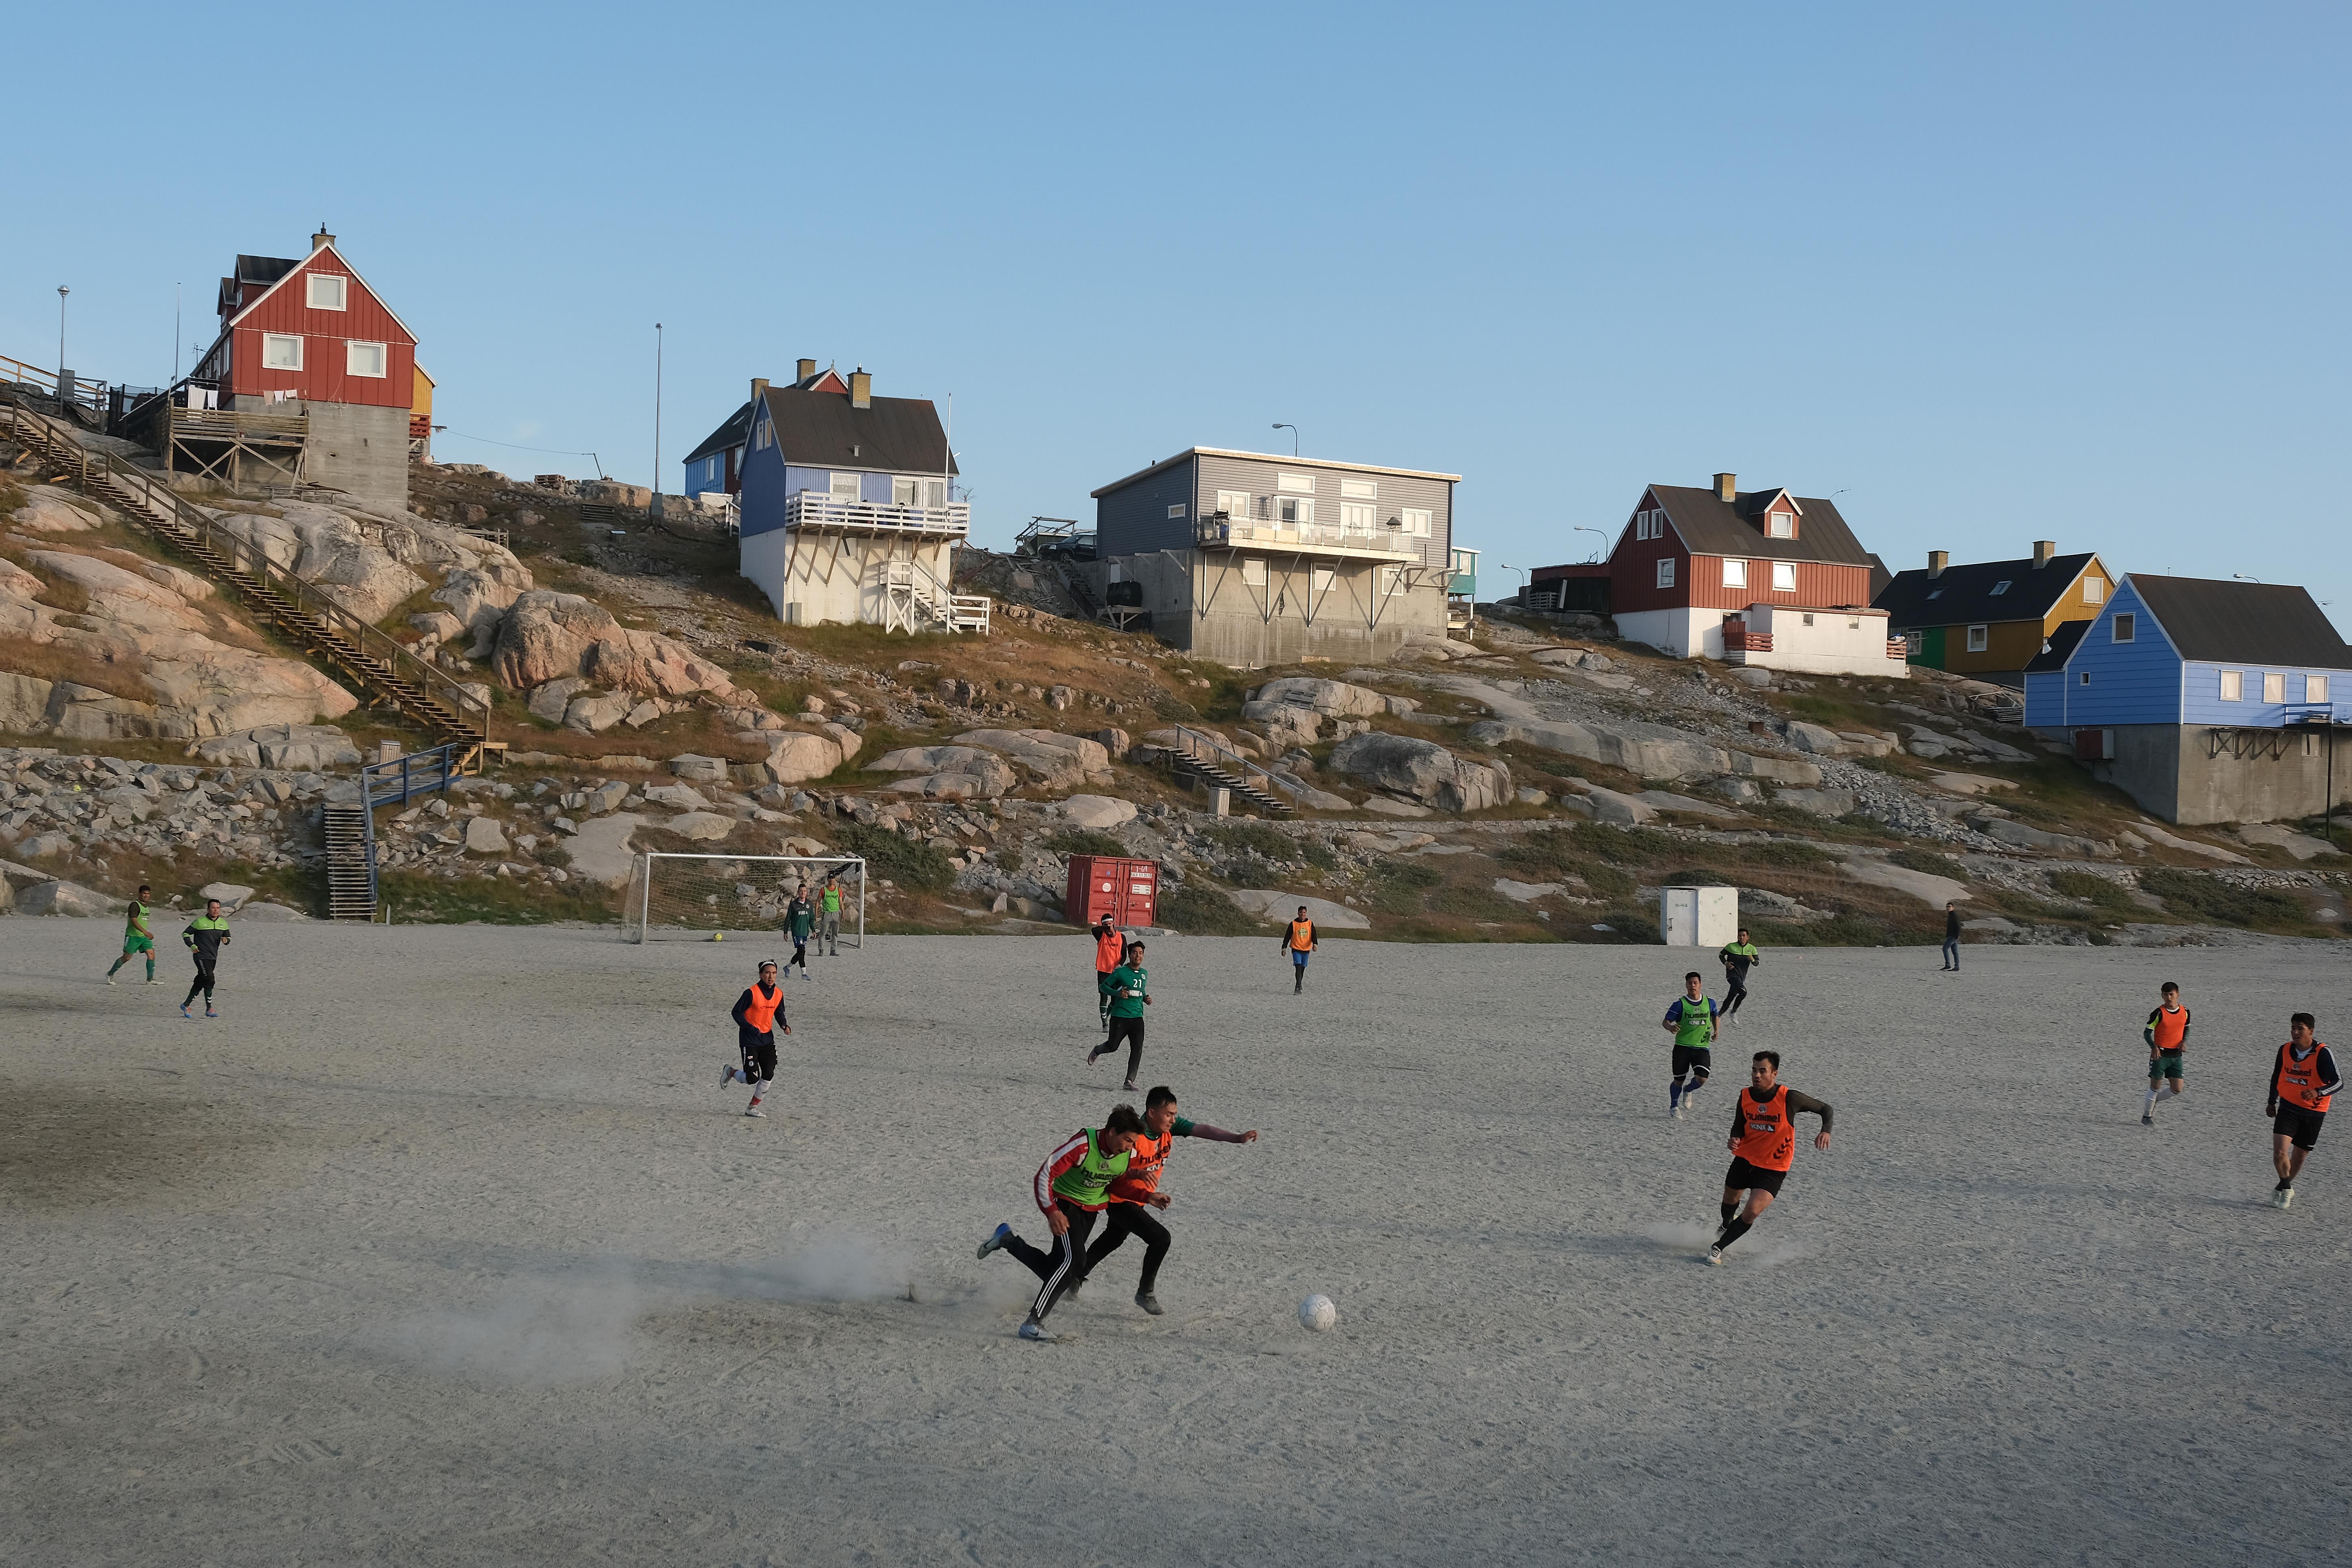 Locals play soccer on a Saturday on August 3, 2019 in Ilulissat, Greenland. 